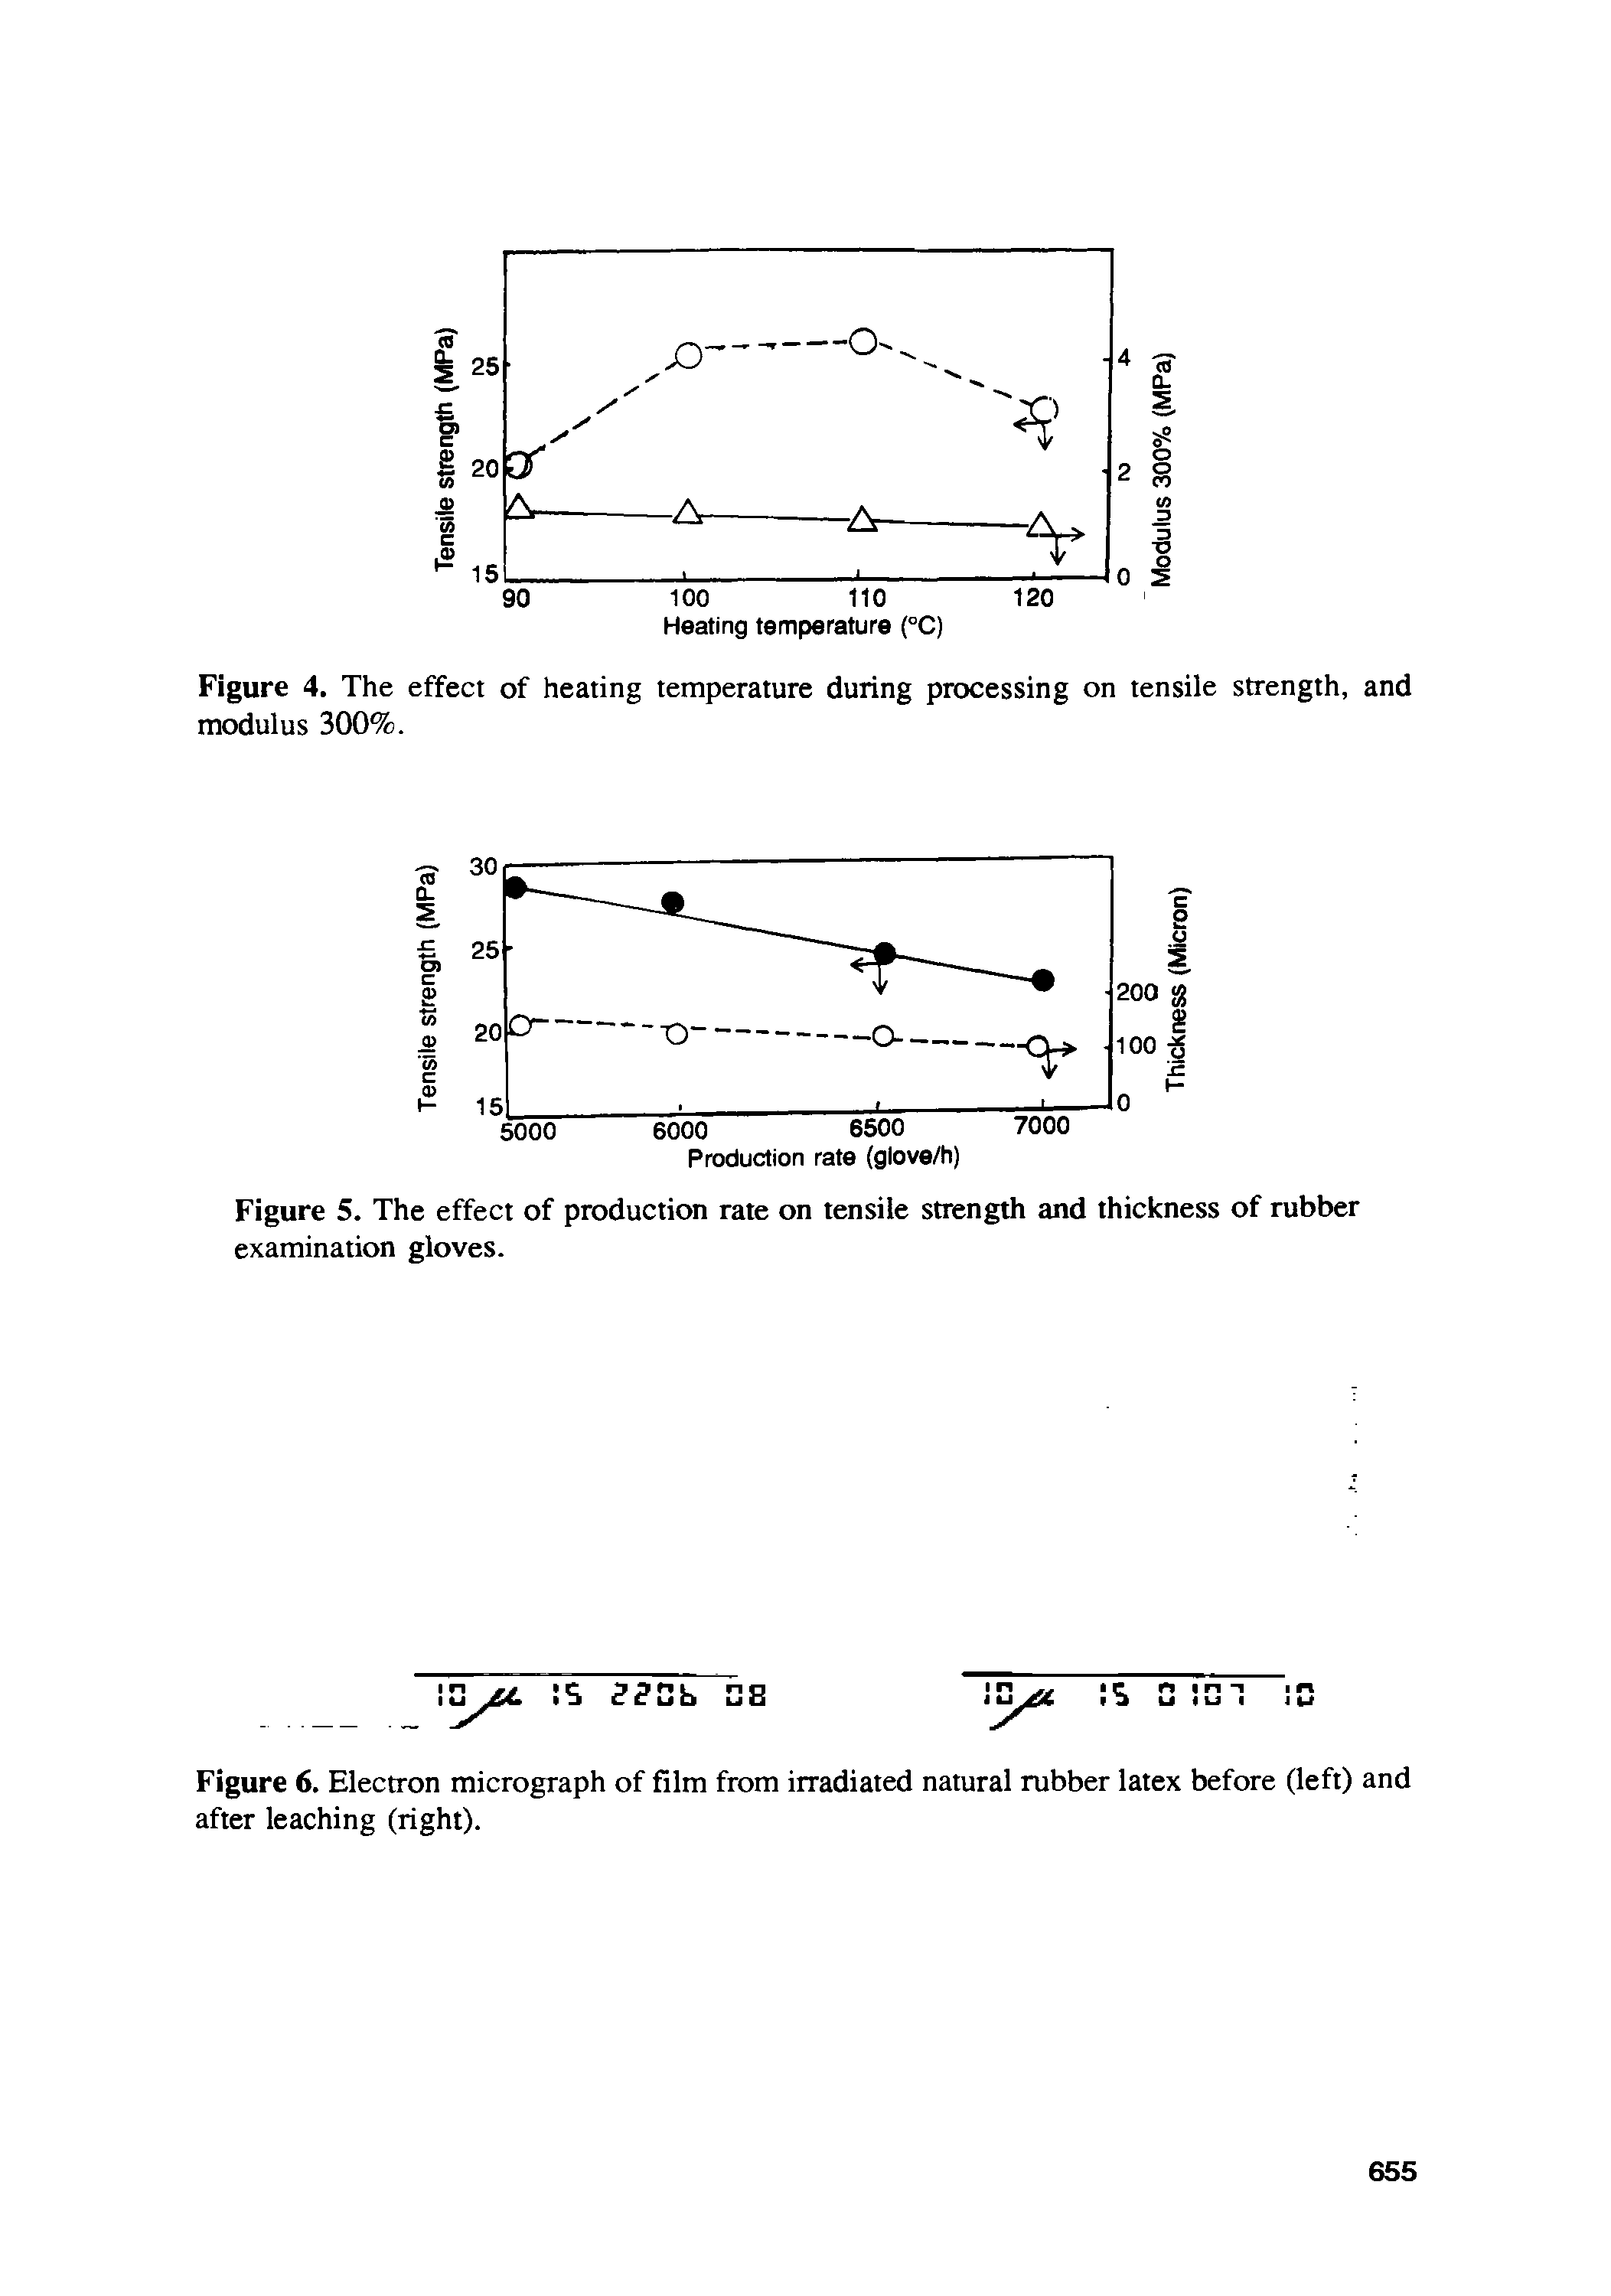 Figure 5. The effect of production rate on tensile strength and thickness of rubber examination gloves.